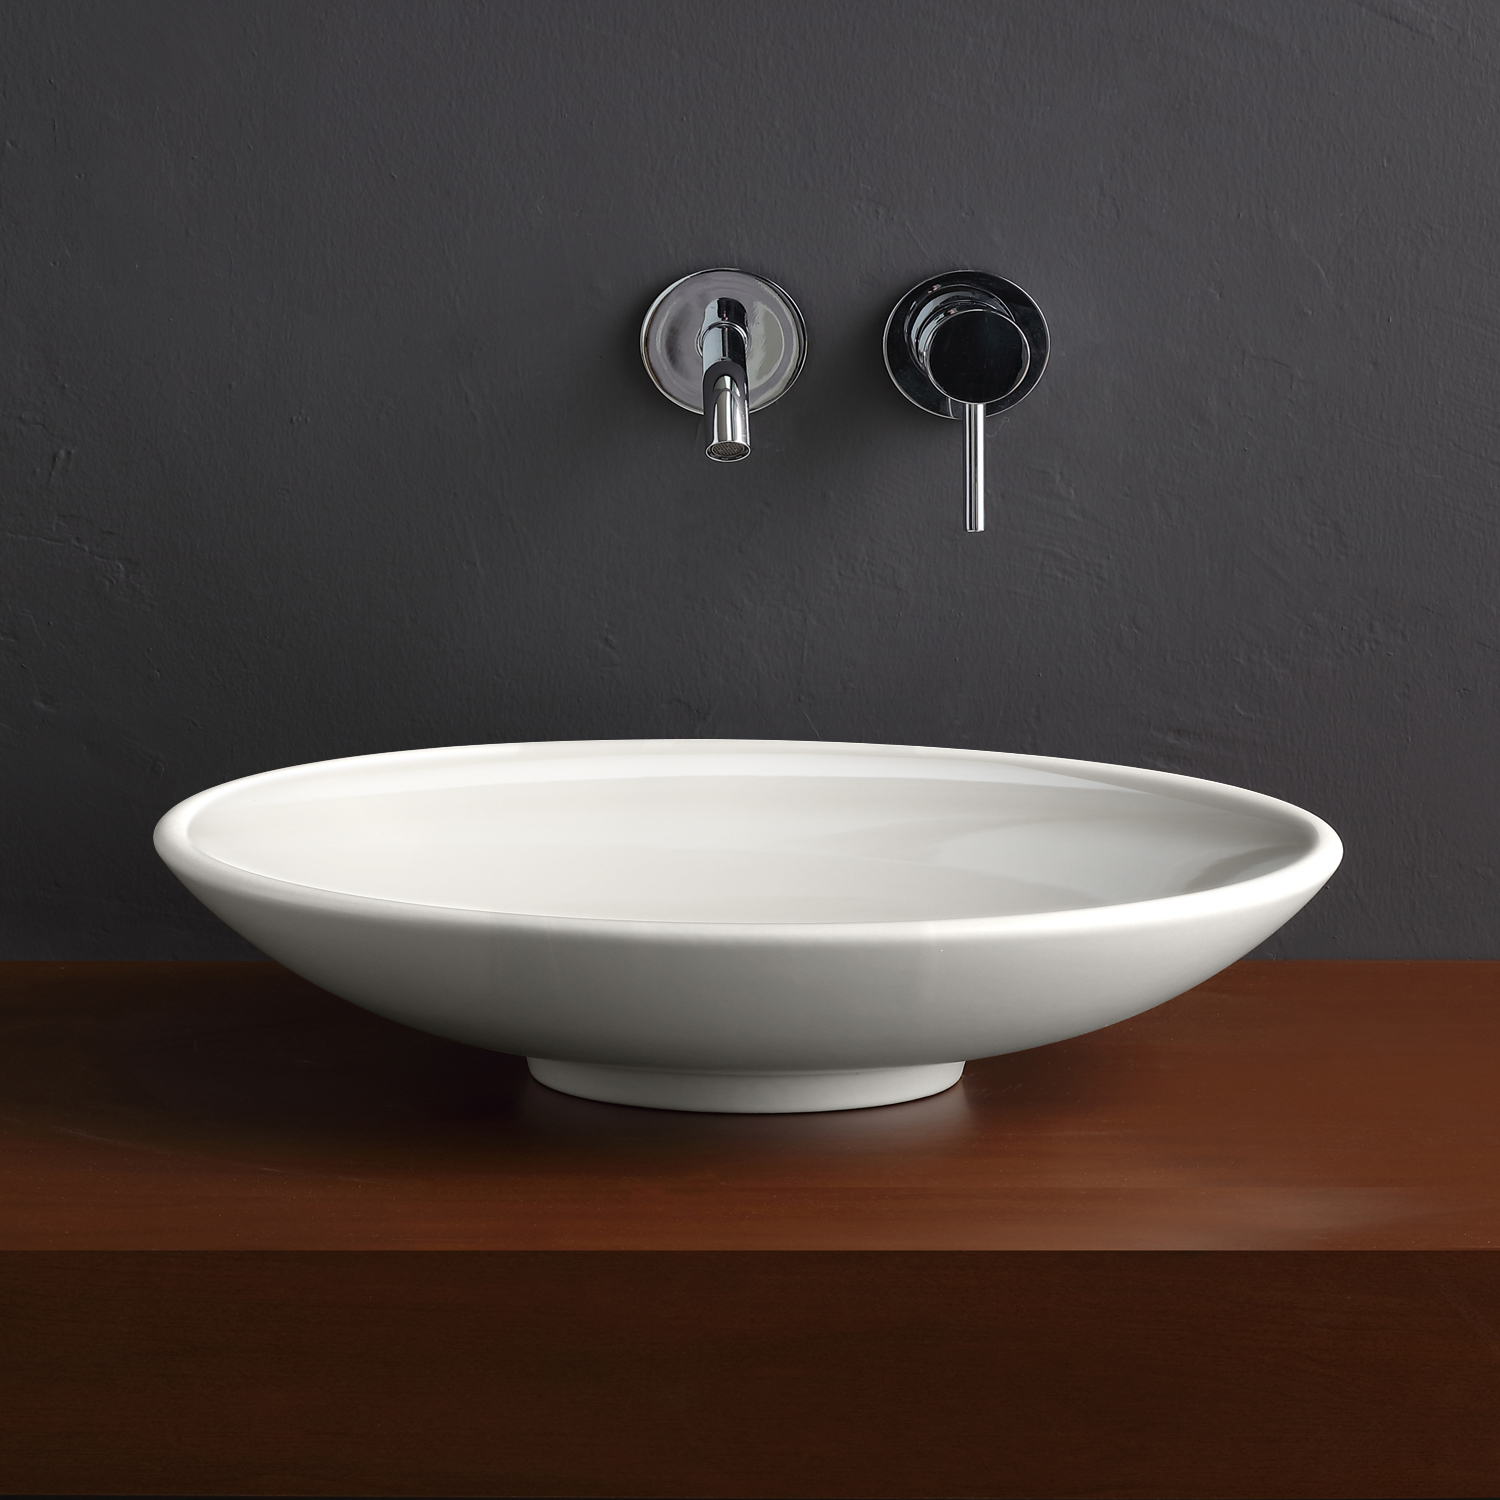 Scarabeo Cup countertop washbasin white - 8044 | REUTER